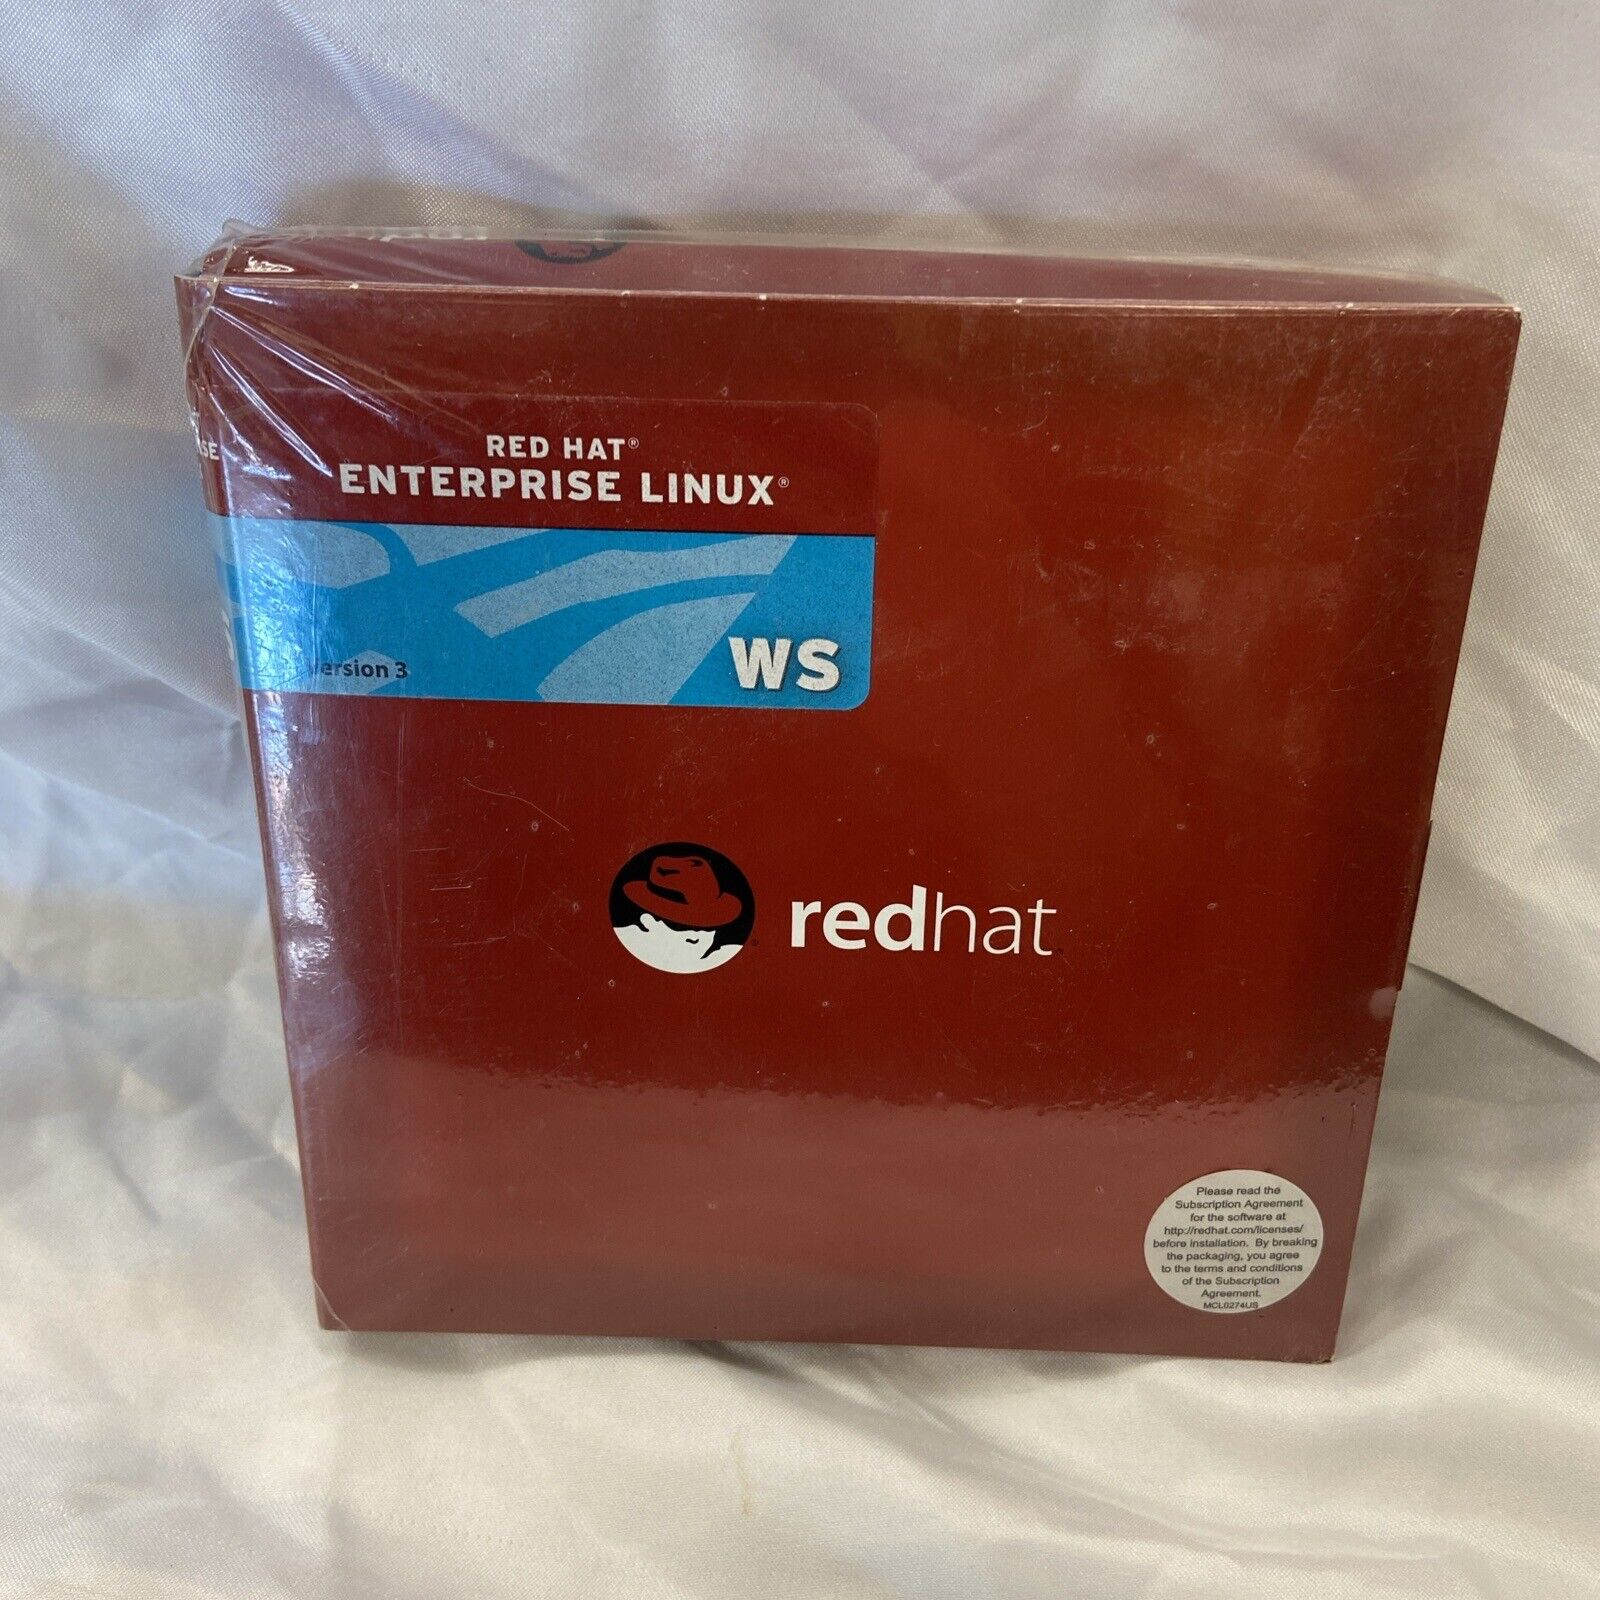 Red Hat Enterprise Linux WS Version 3 For The x86 Architecture On 9 CDs- New